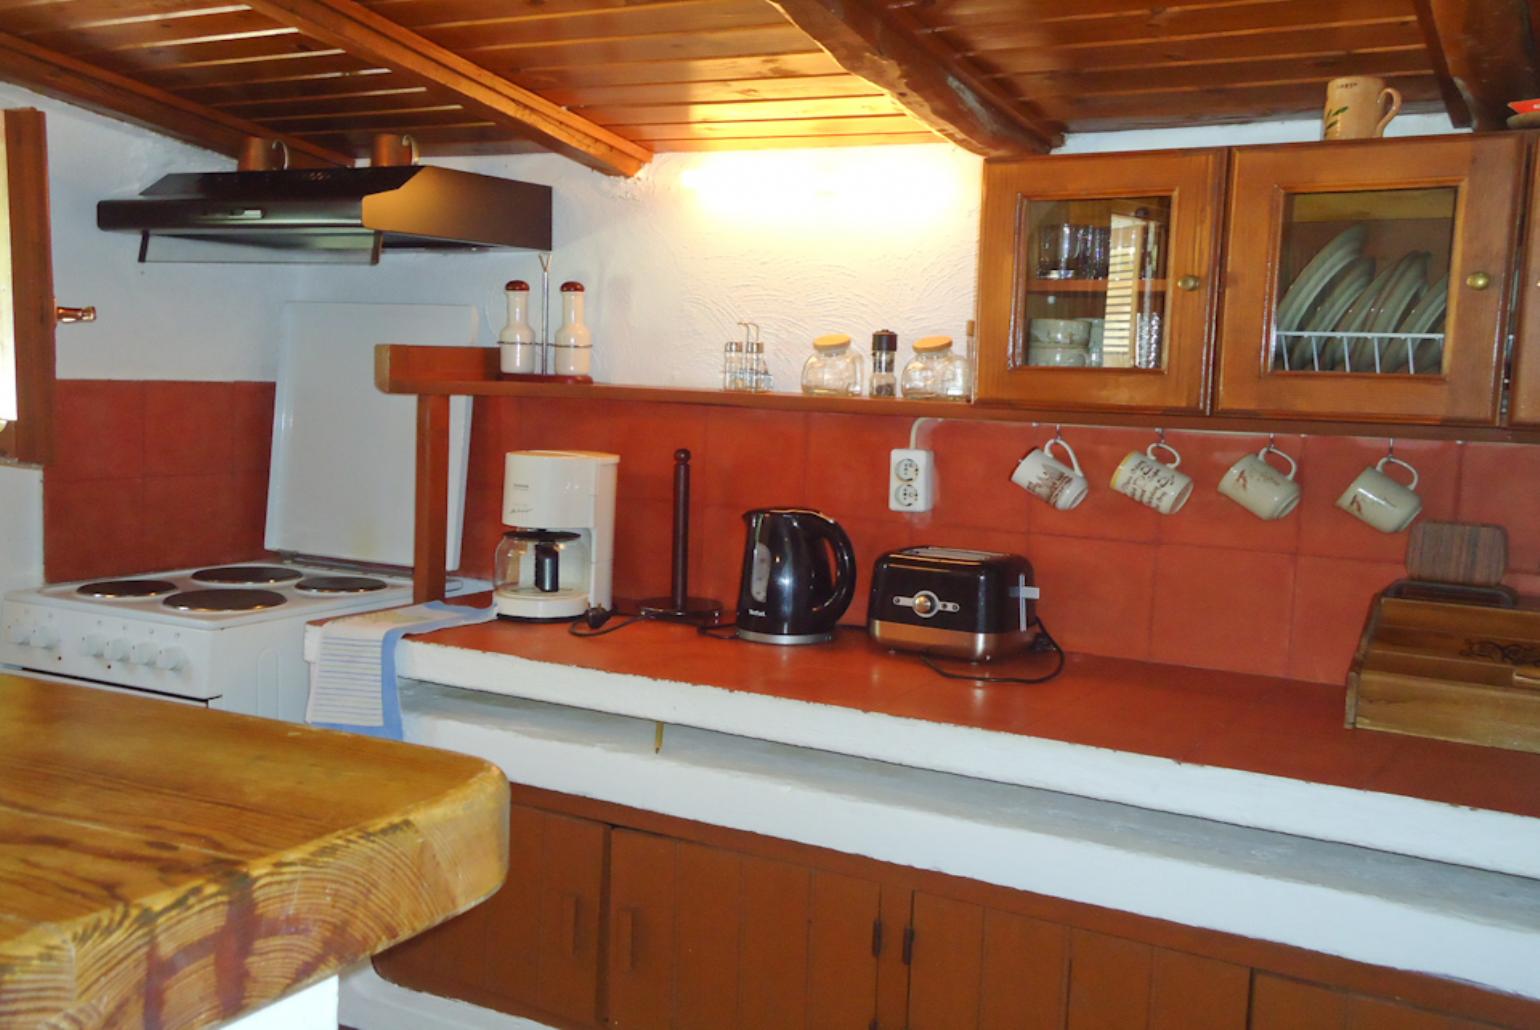 Equipped kitchen with breakfast bar